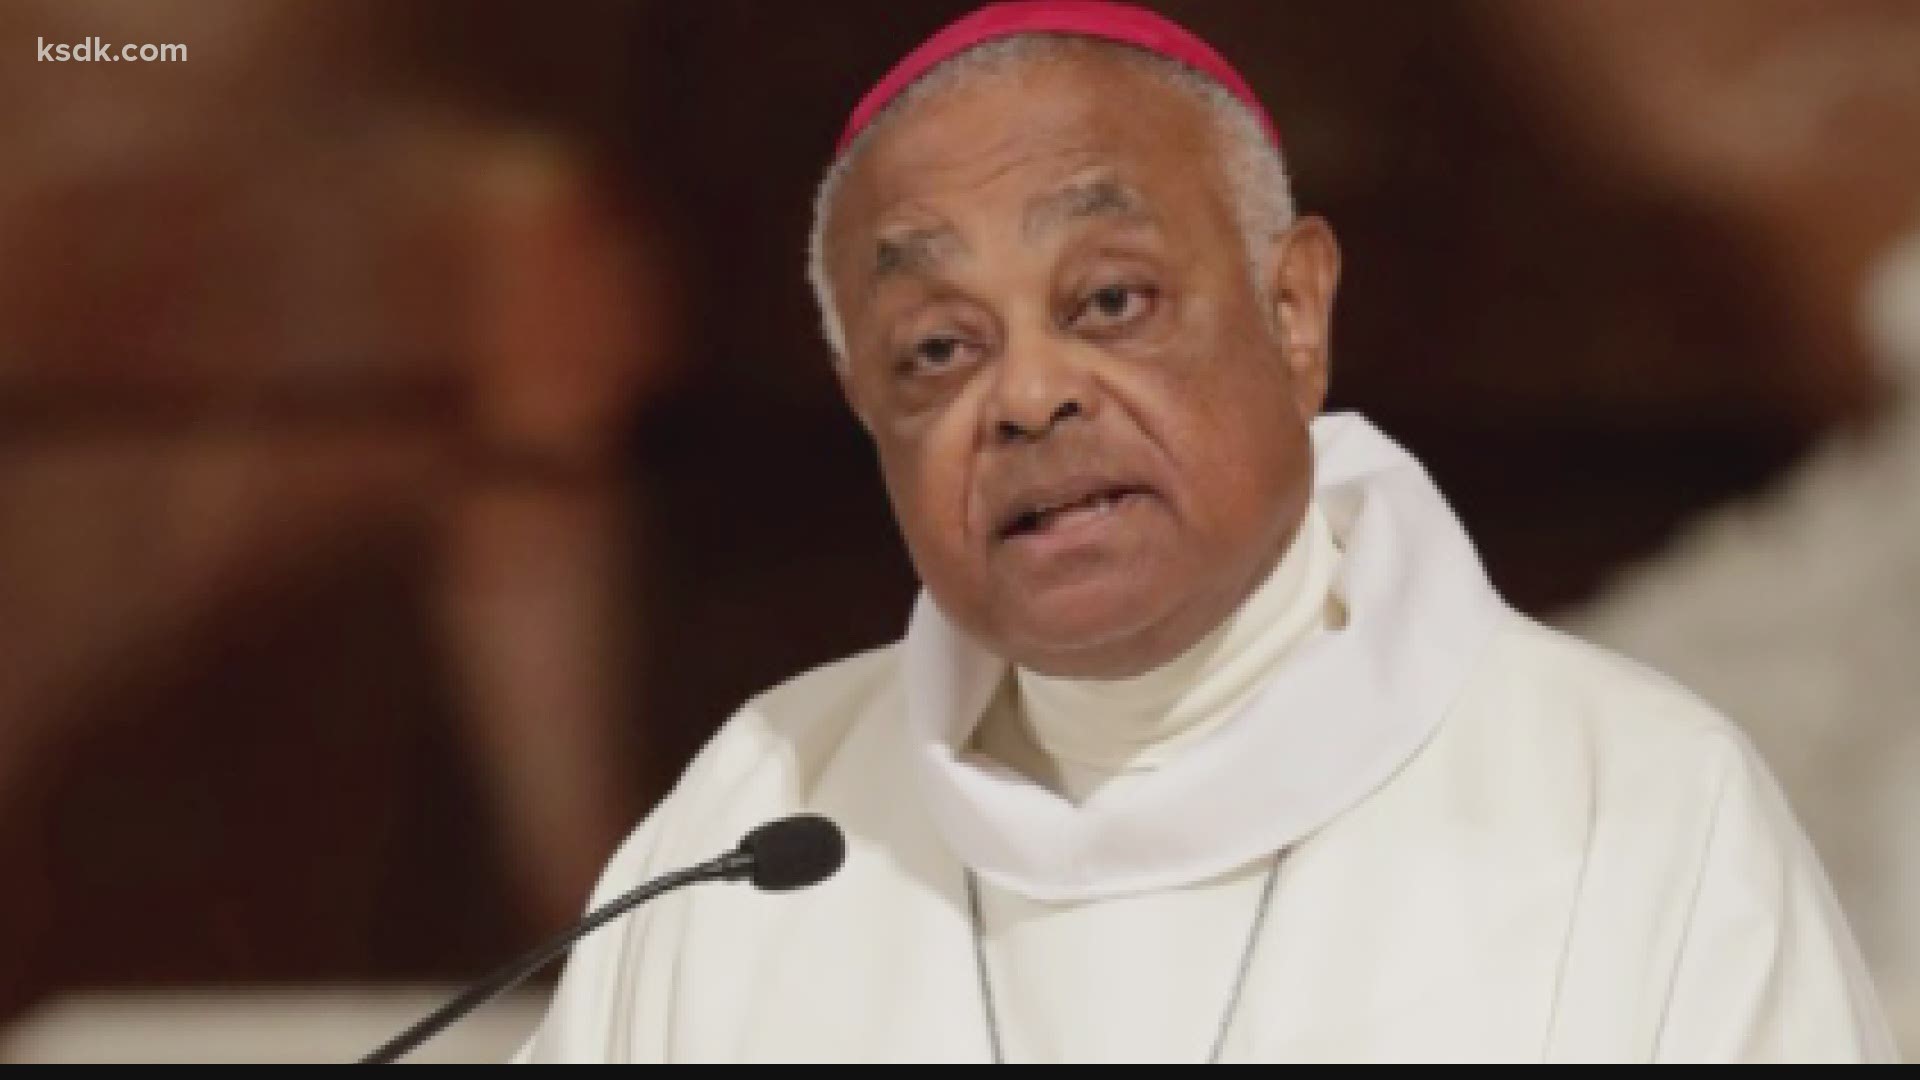 Washington D.C. Archbishop Wilton Gregory would become the first Black U.S. prelate to earn the coveted red hat.